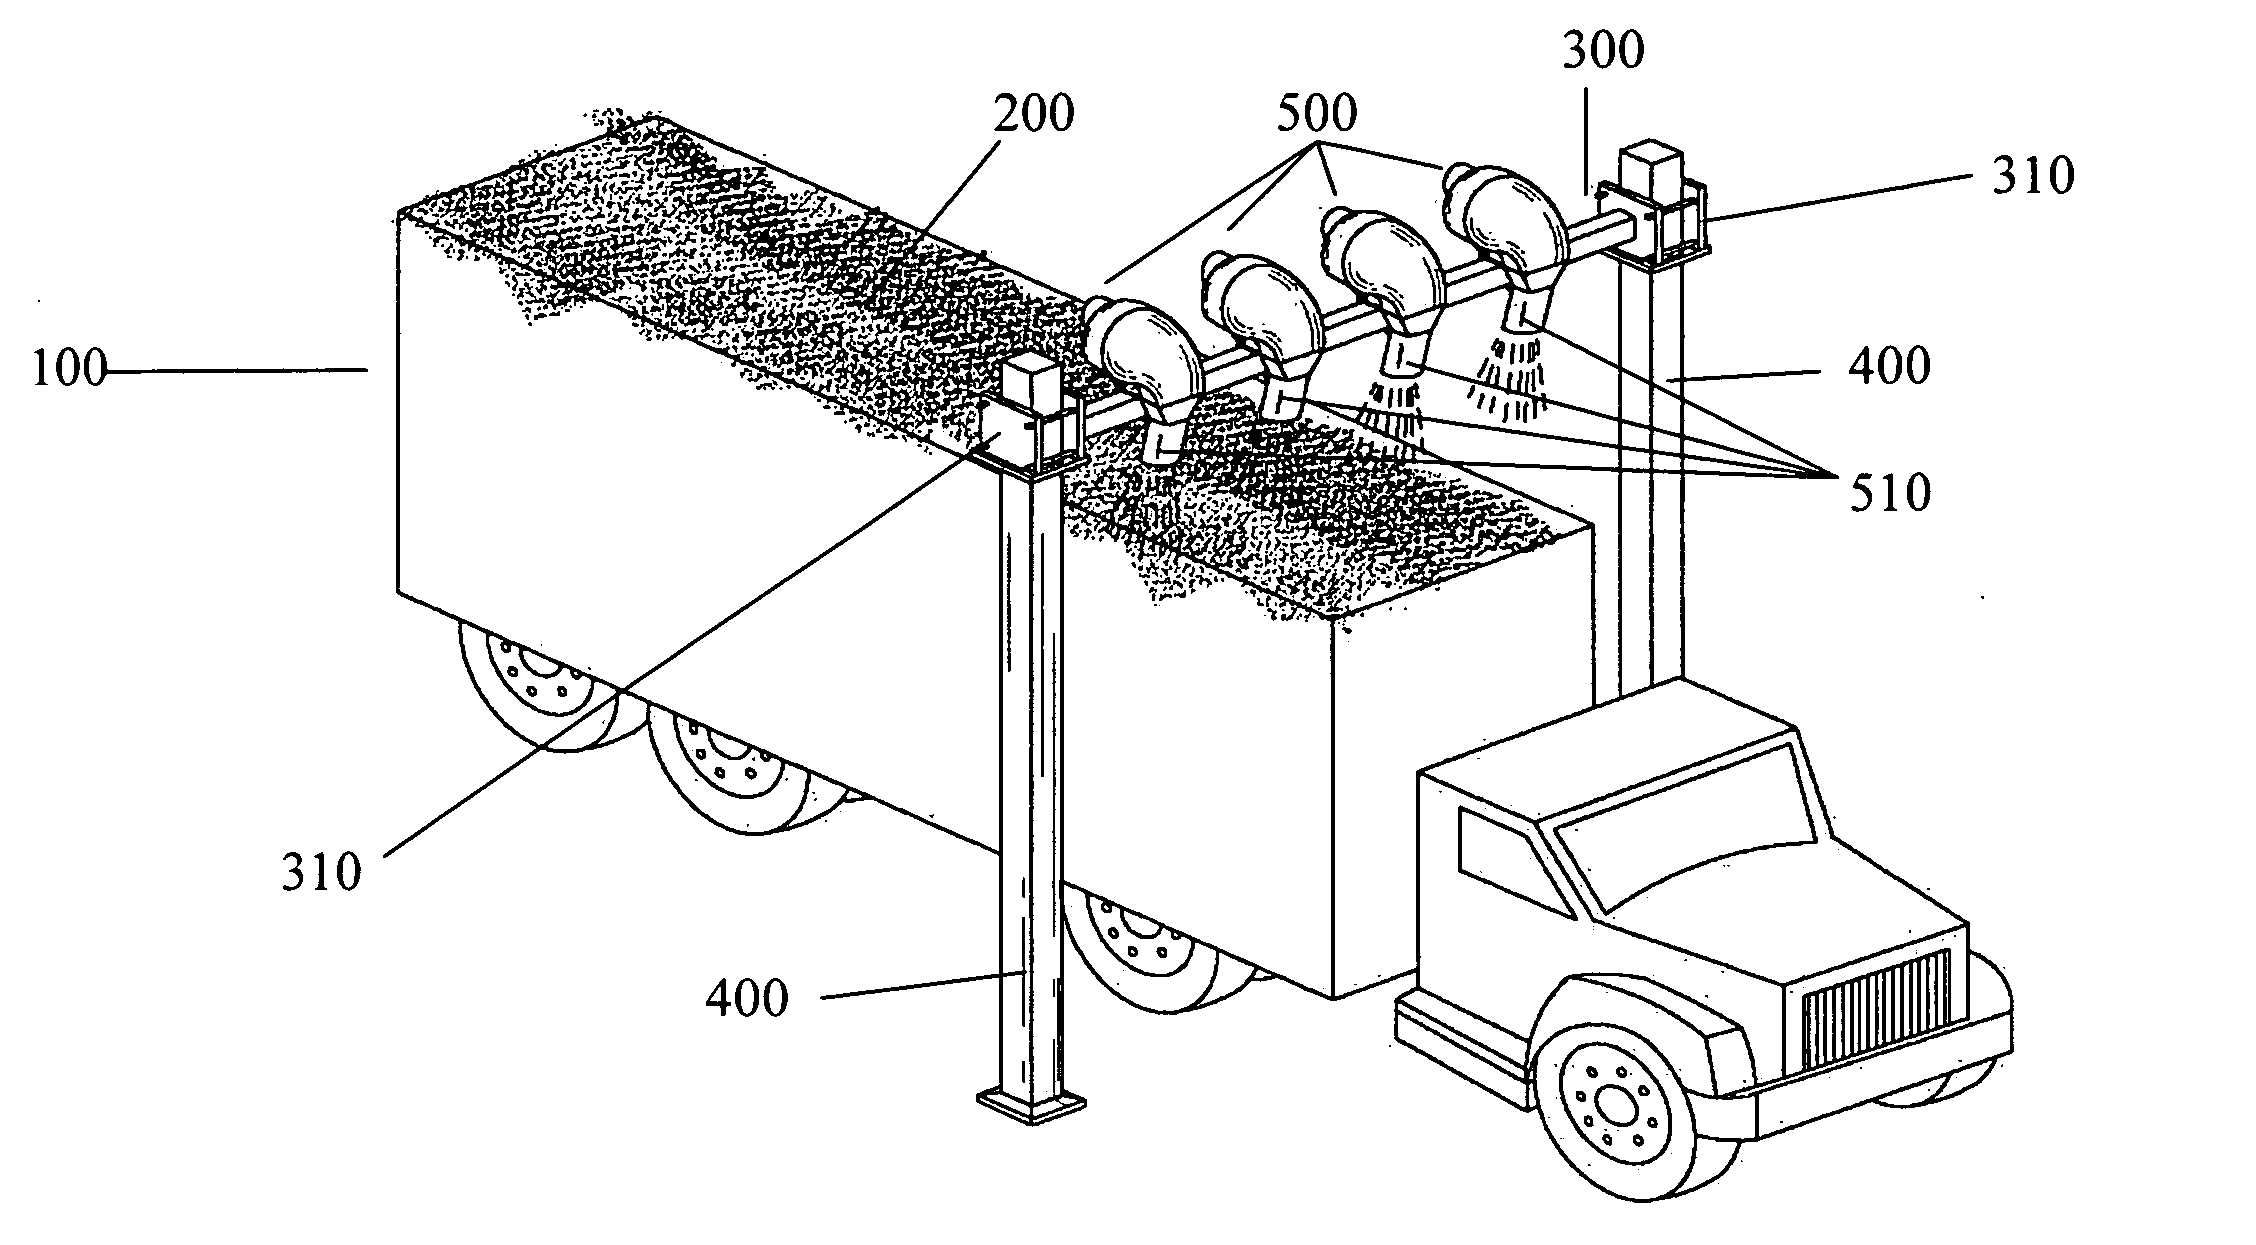 Device to remove snow from large vehicles